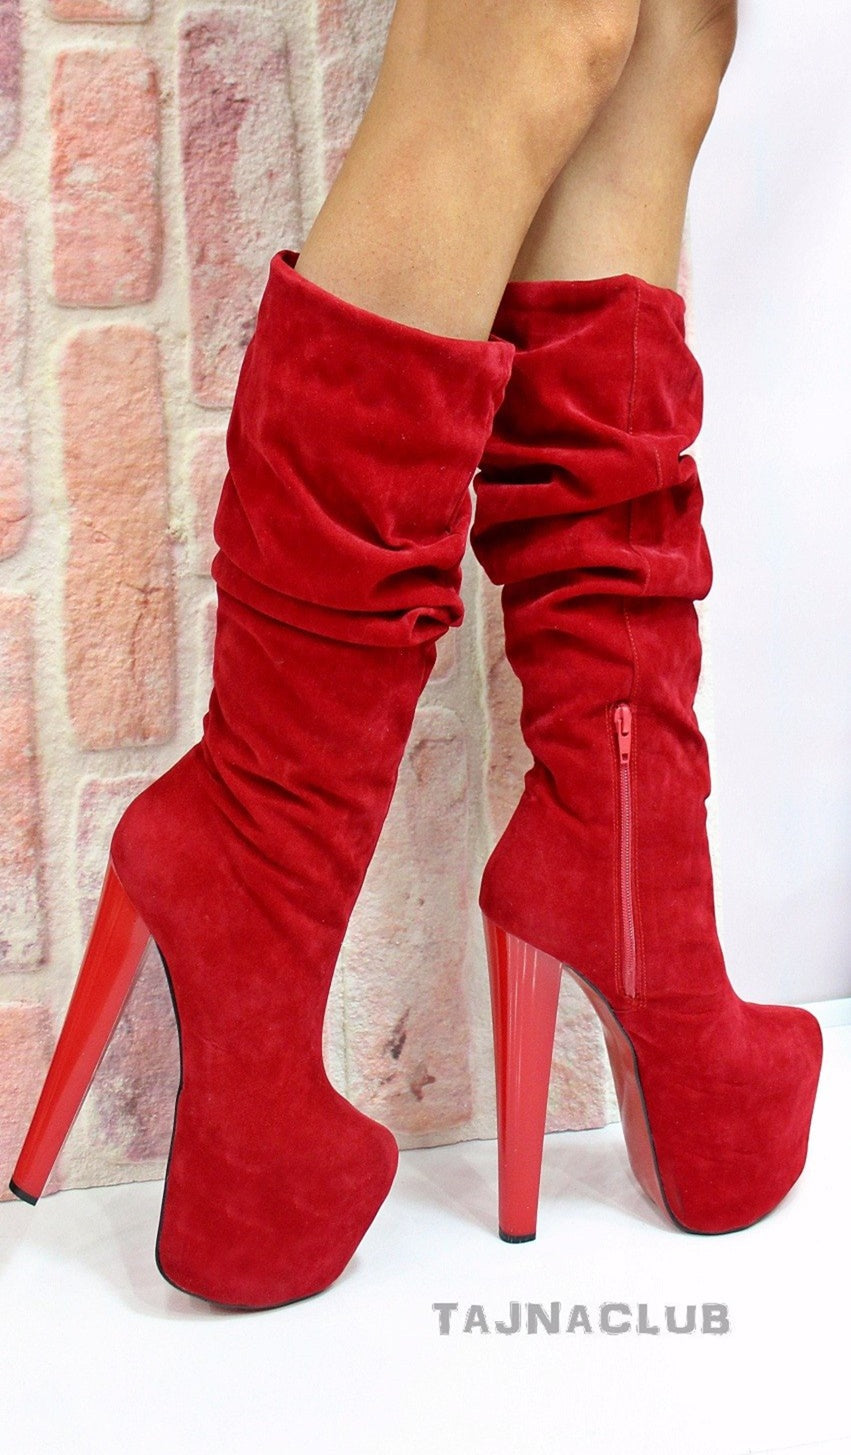 RED SUEDE MIDCALF CHUNKY HEEL BOOTS